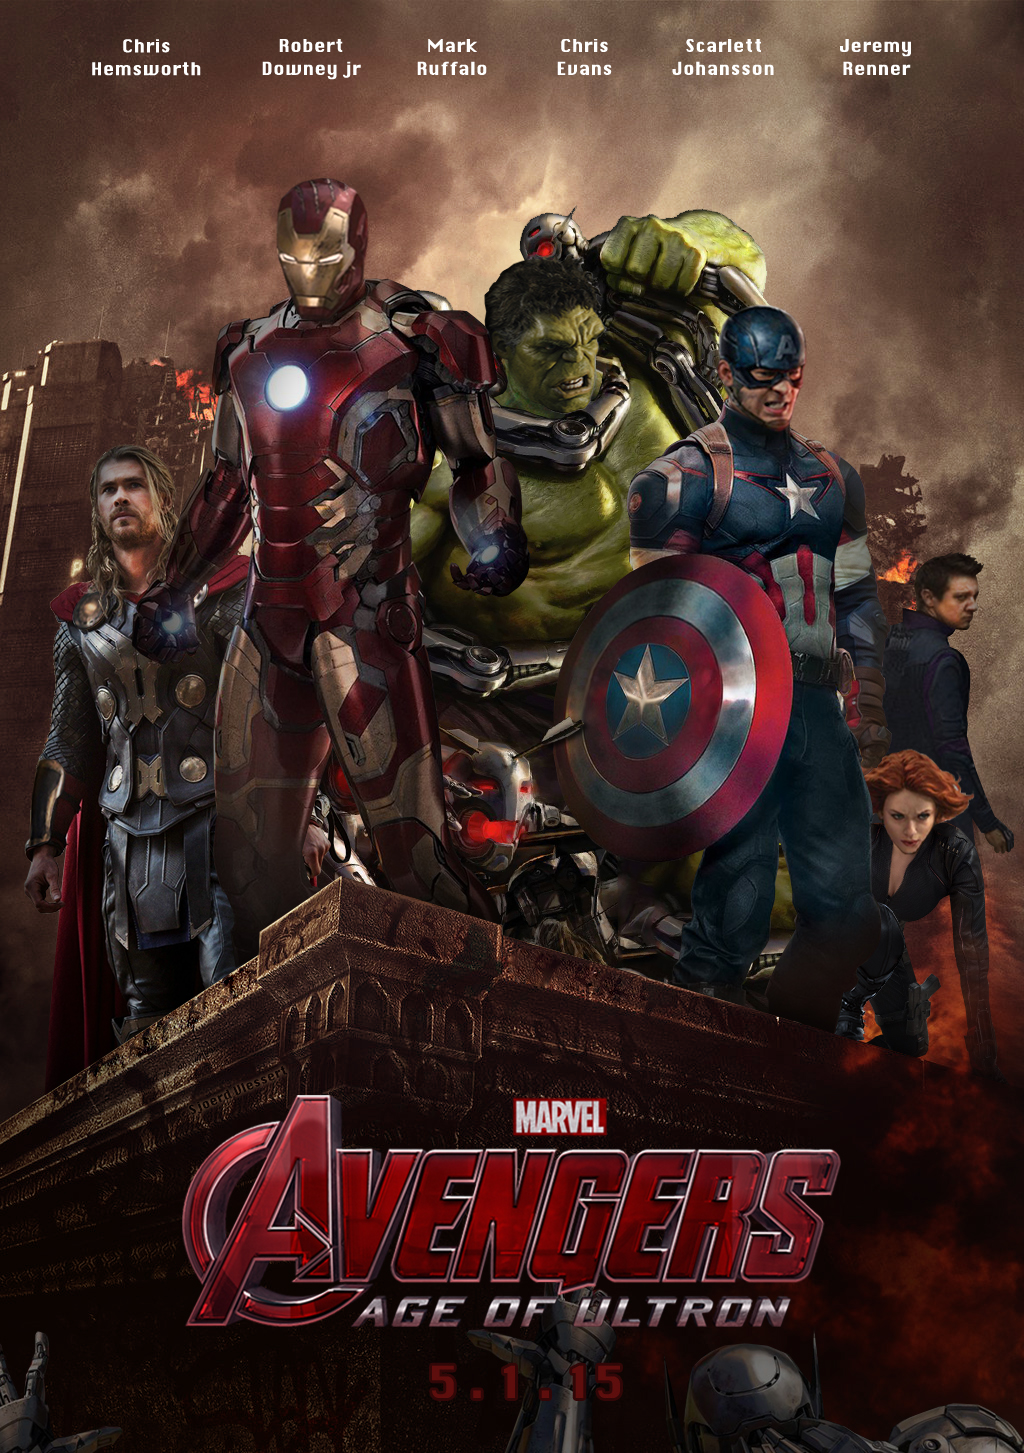 Avengers-age-of-Ultron-poster-the-avengers-age-of-ultron-37434941-1024-1453.jpg